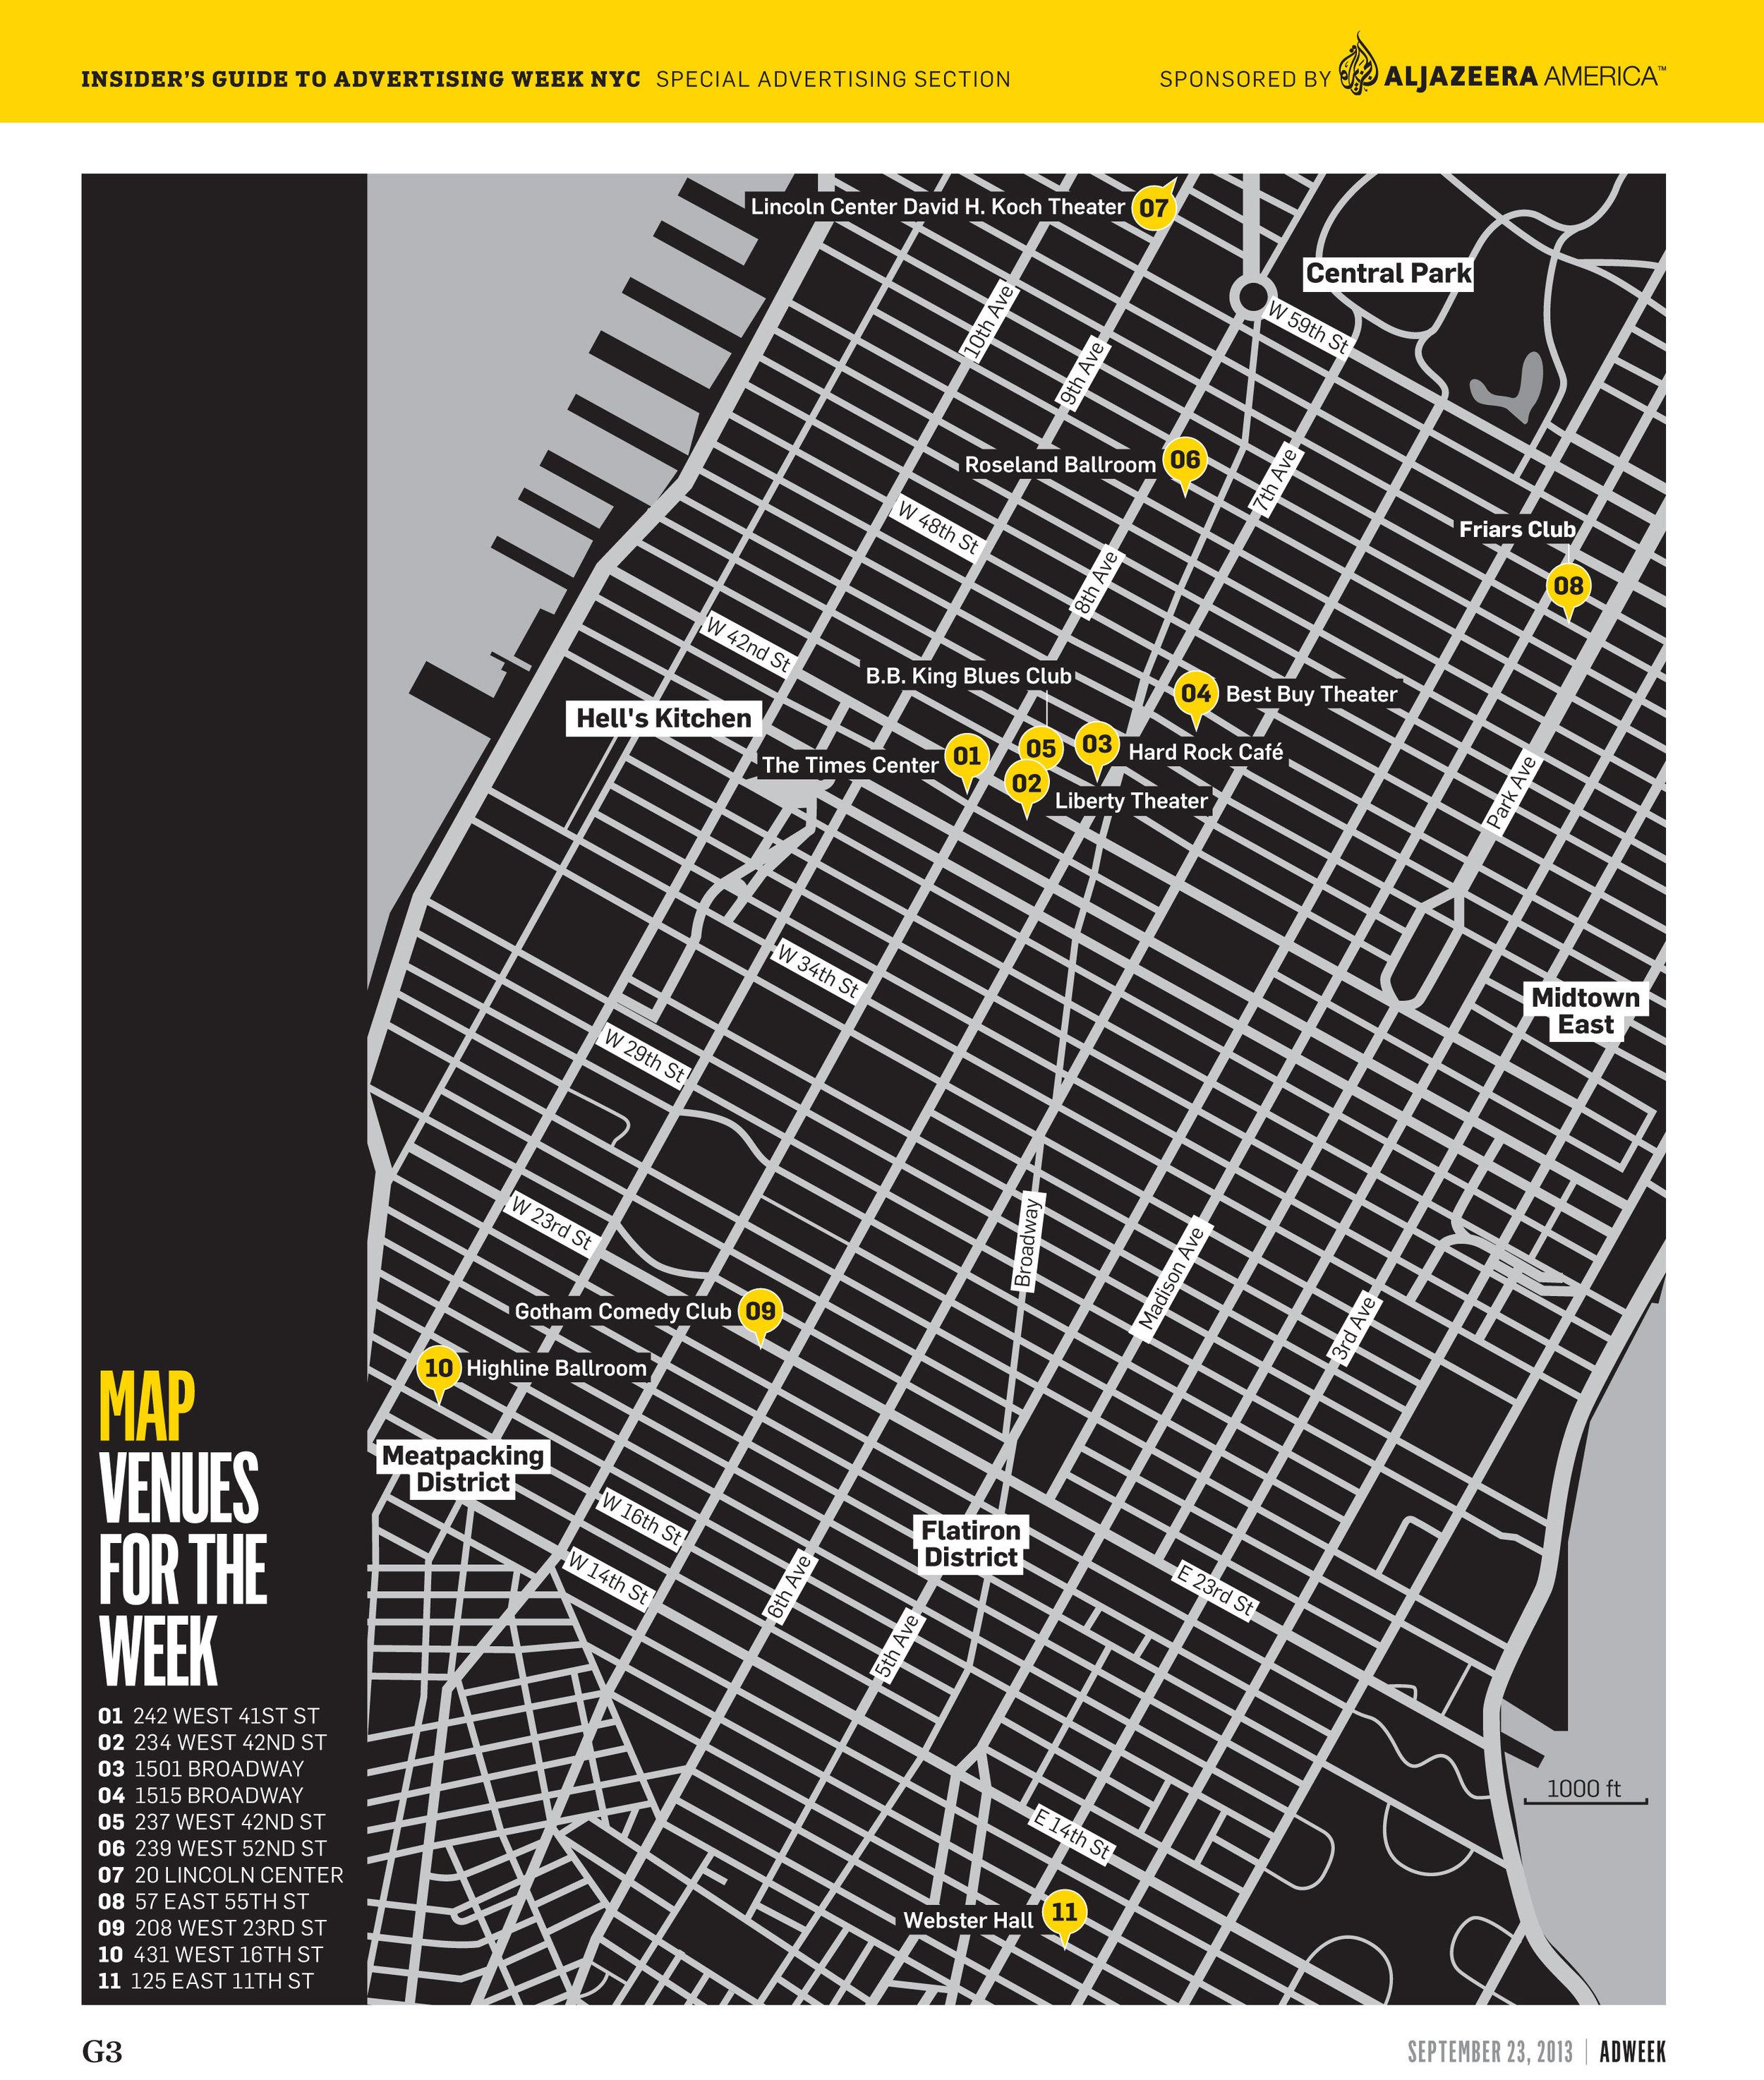 Insider's Guide to Advertising Week NYC